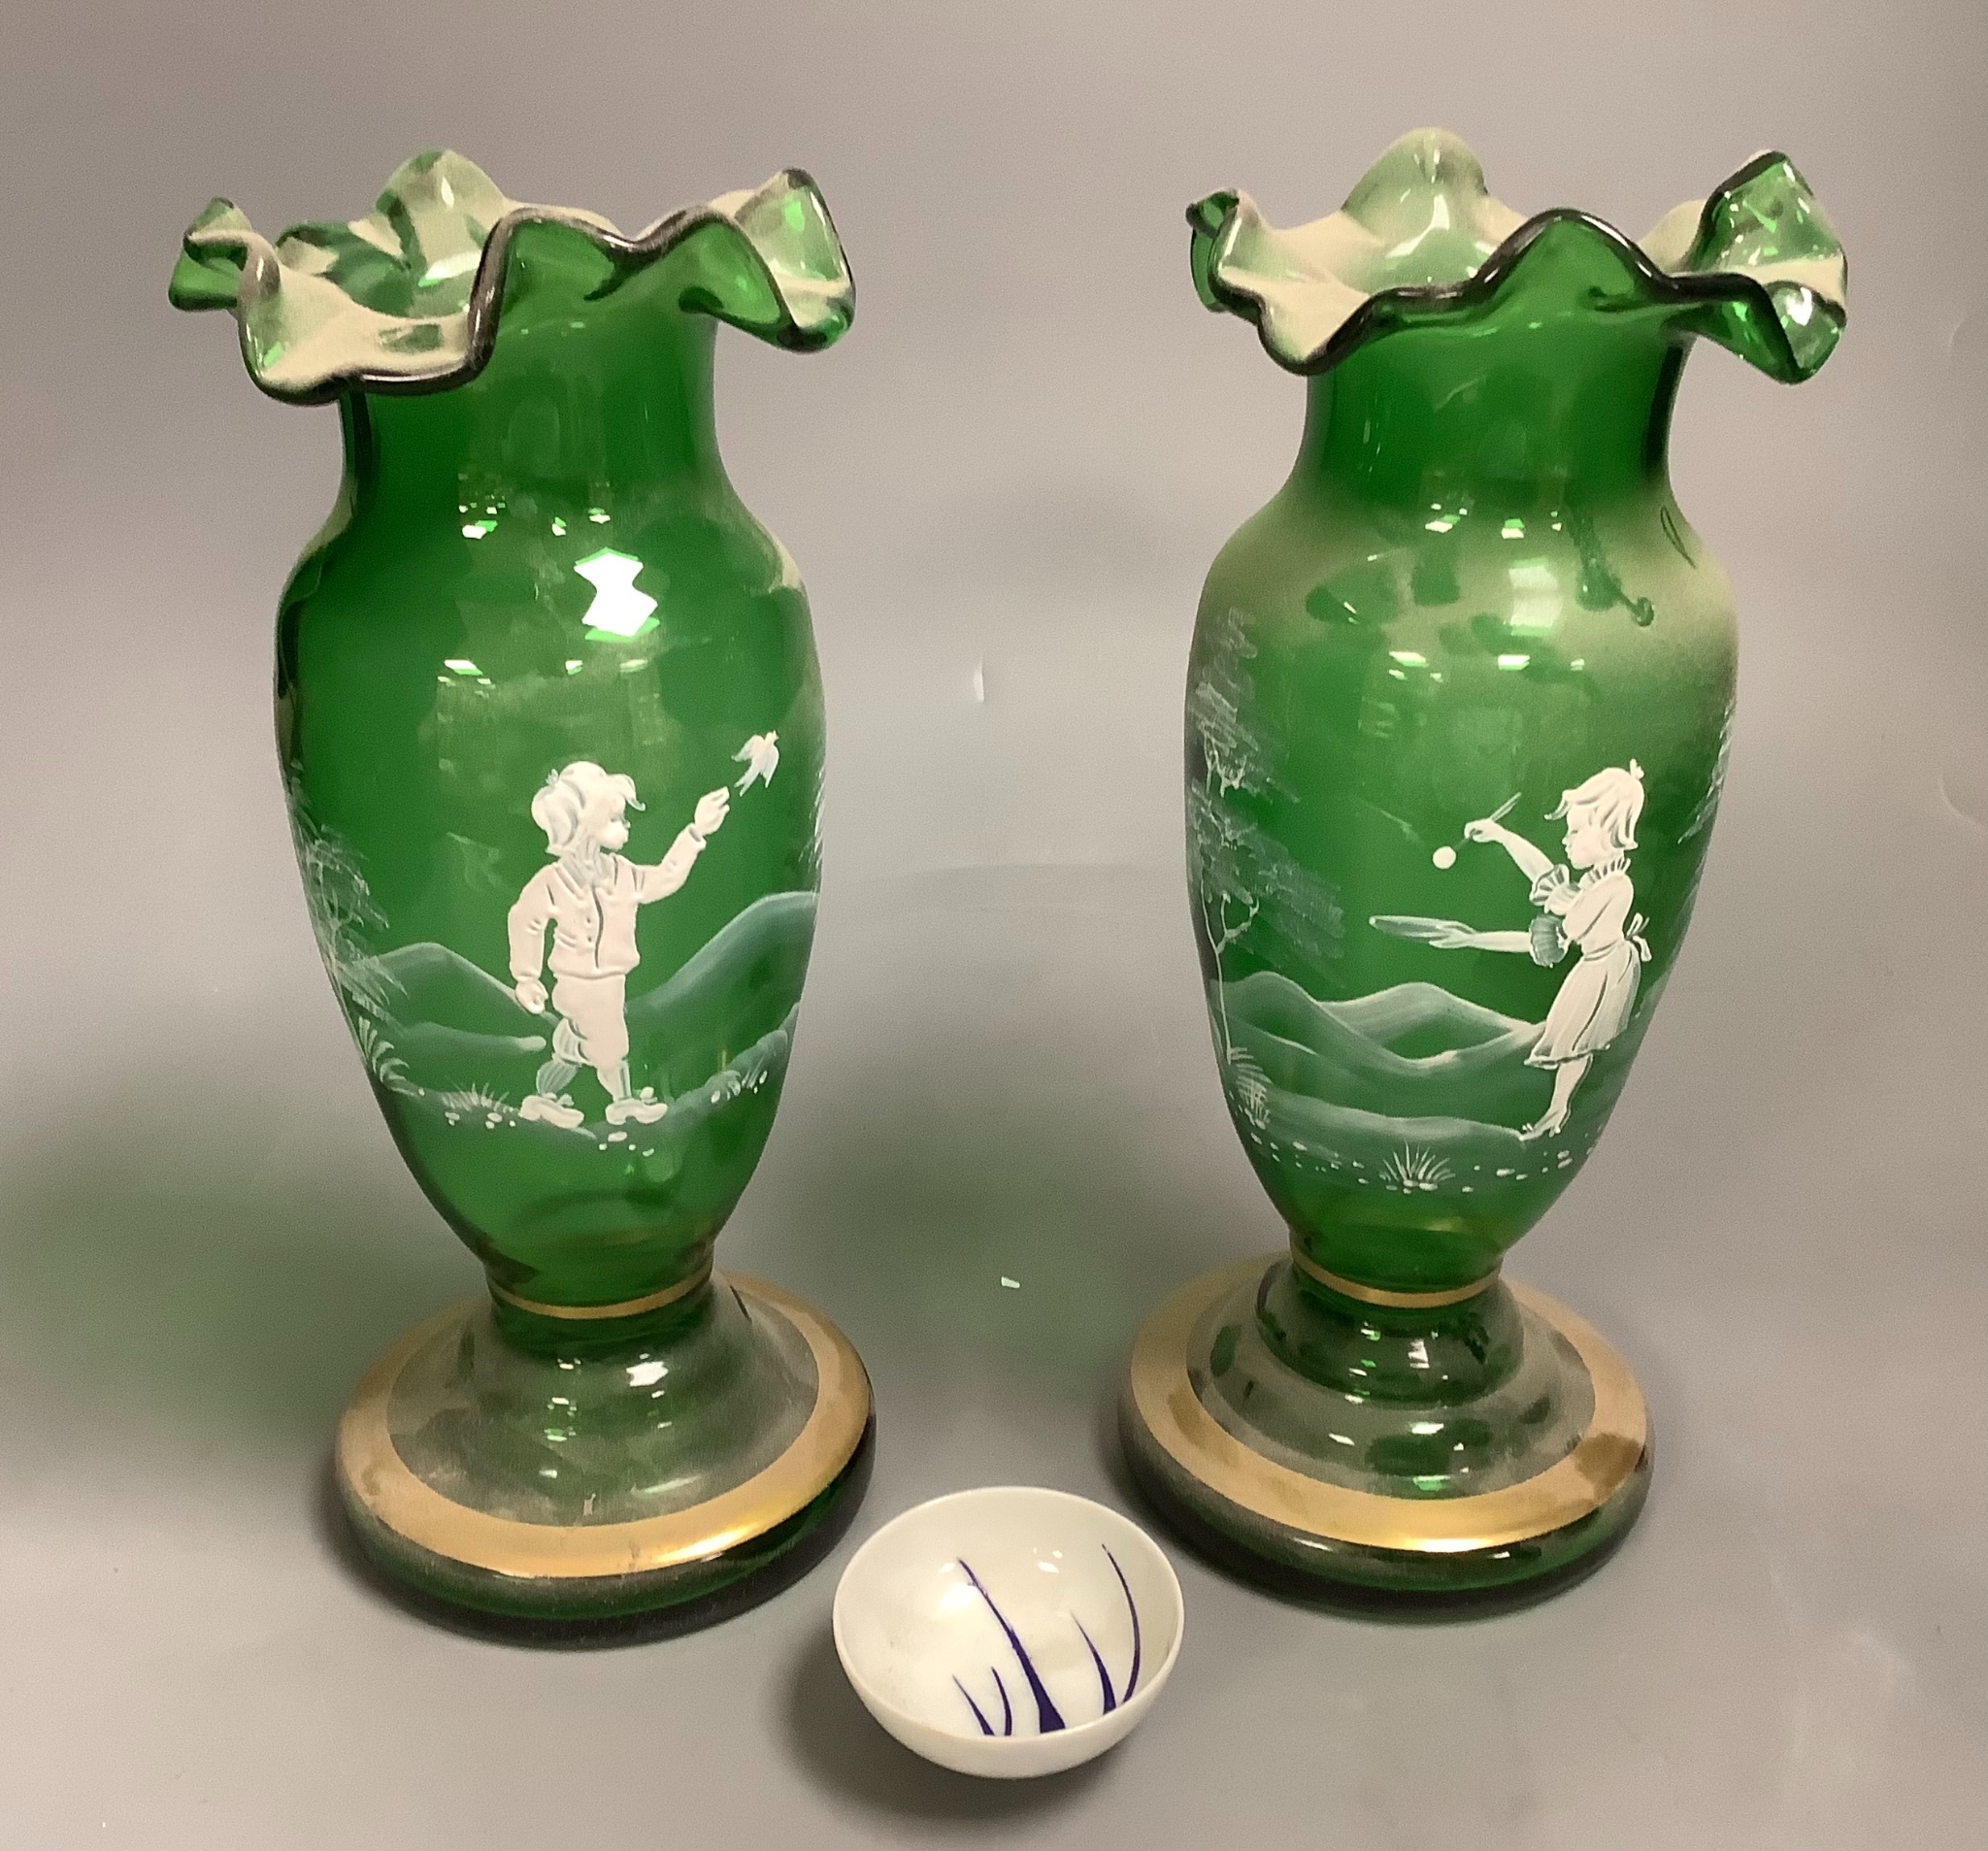 A pair of Mary Gregory style green glass vases and a soy sauce dish